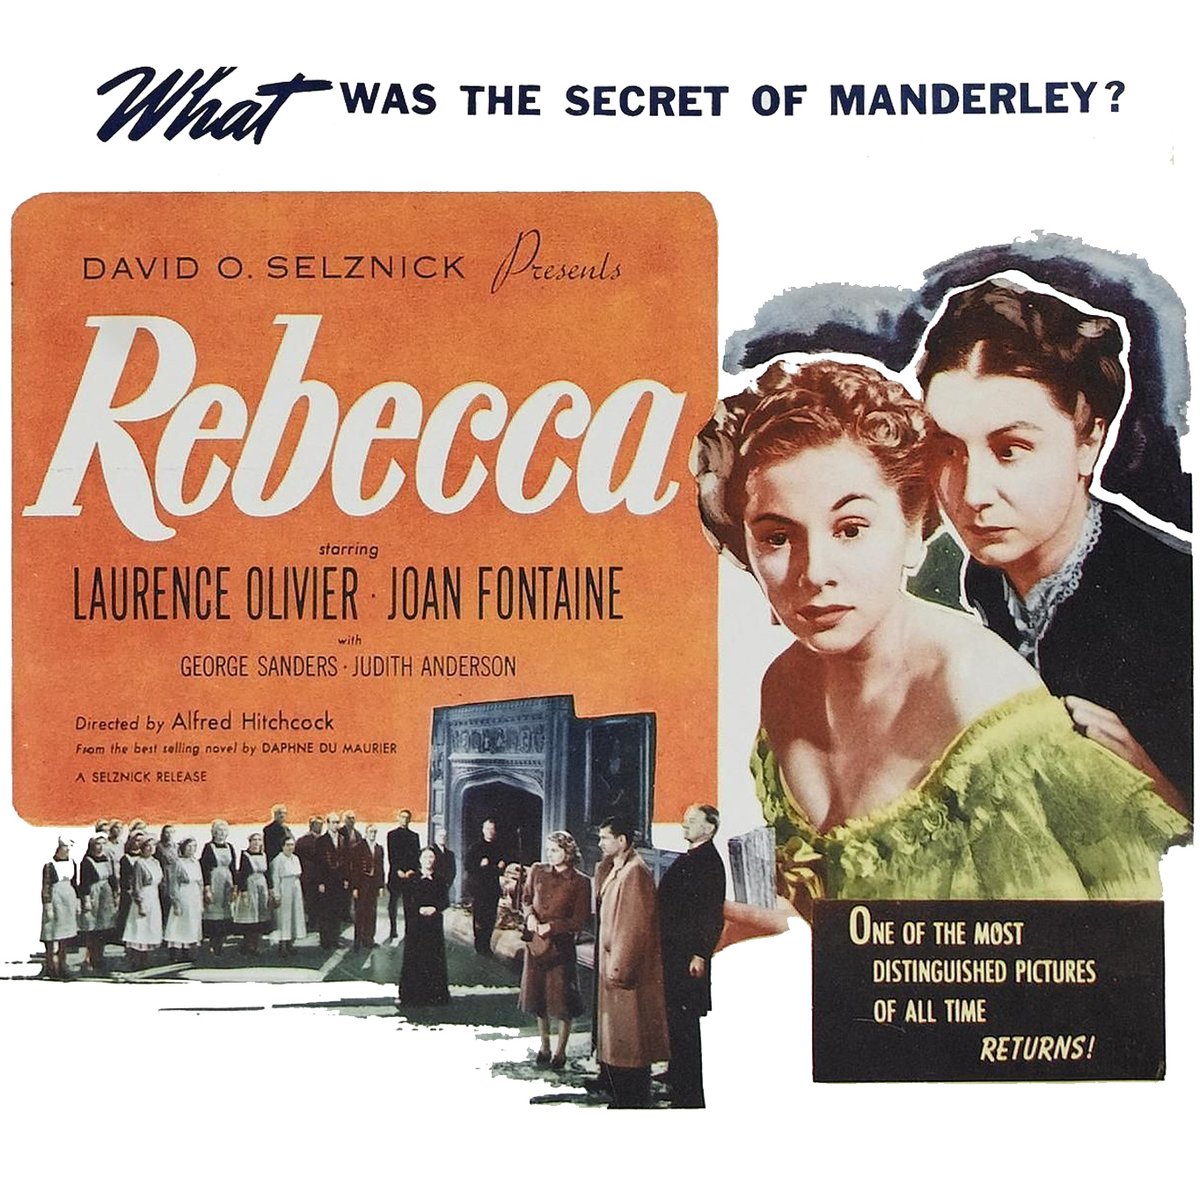 Next Monday, May 20, our Thank God It’s Queer series returns with a screening of 1940’s REBECCA. Directed by Alfred Hitchcock and based on the book by Daphne du Maurier, REBECCA is a cinematic feast best experienced on the big screen. hollywoodtheatre.org/events/rebecca/